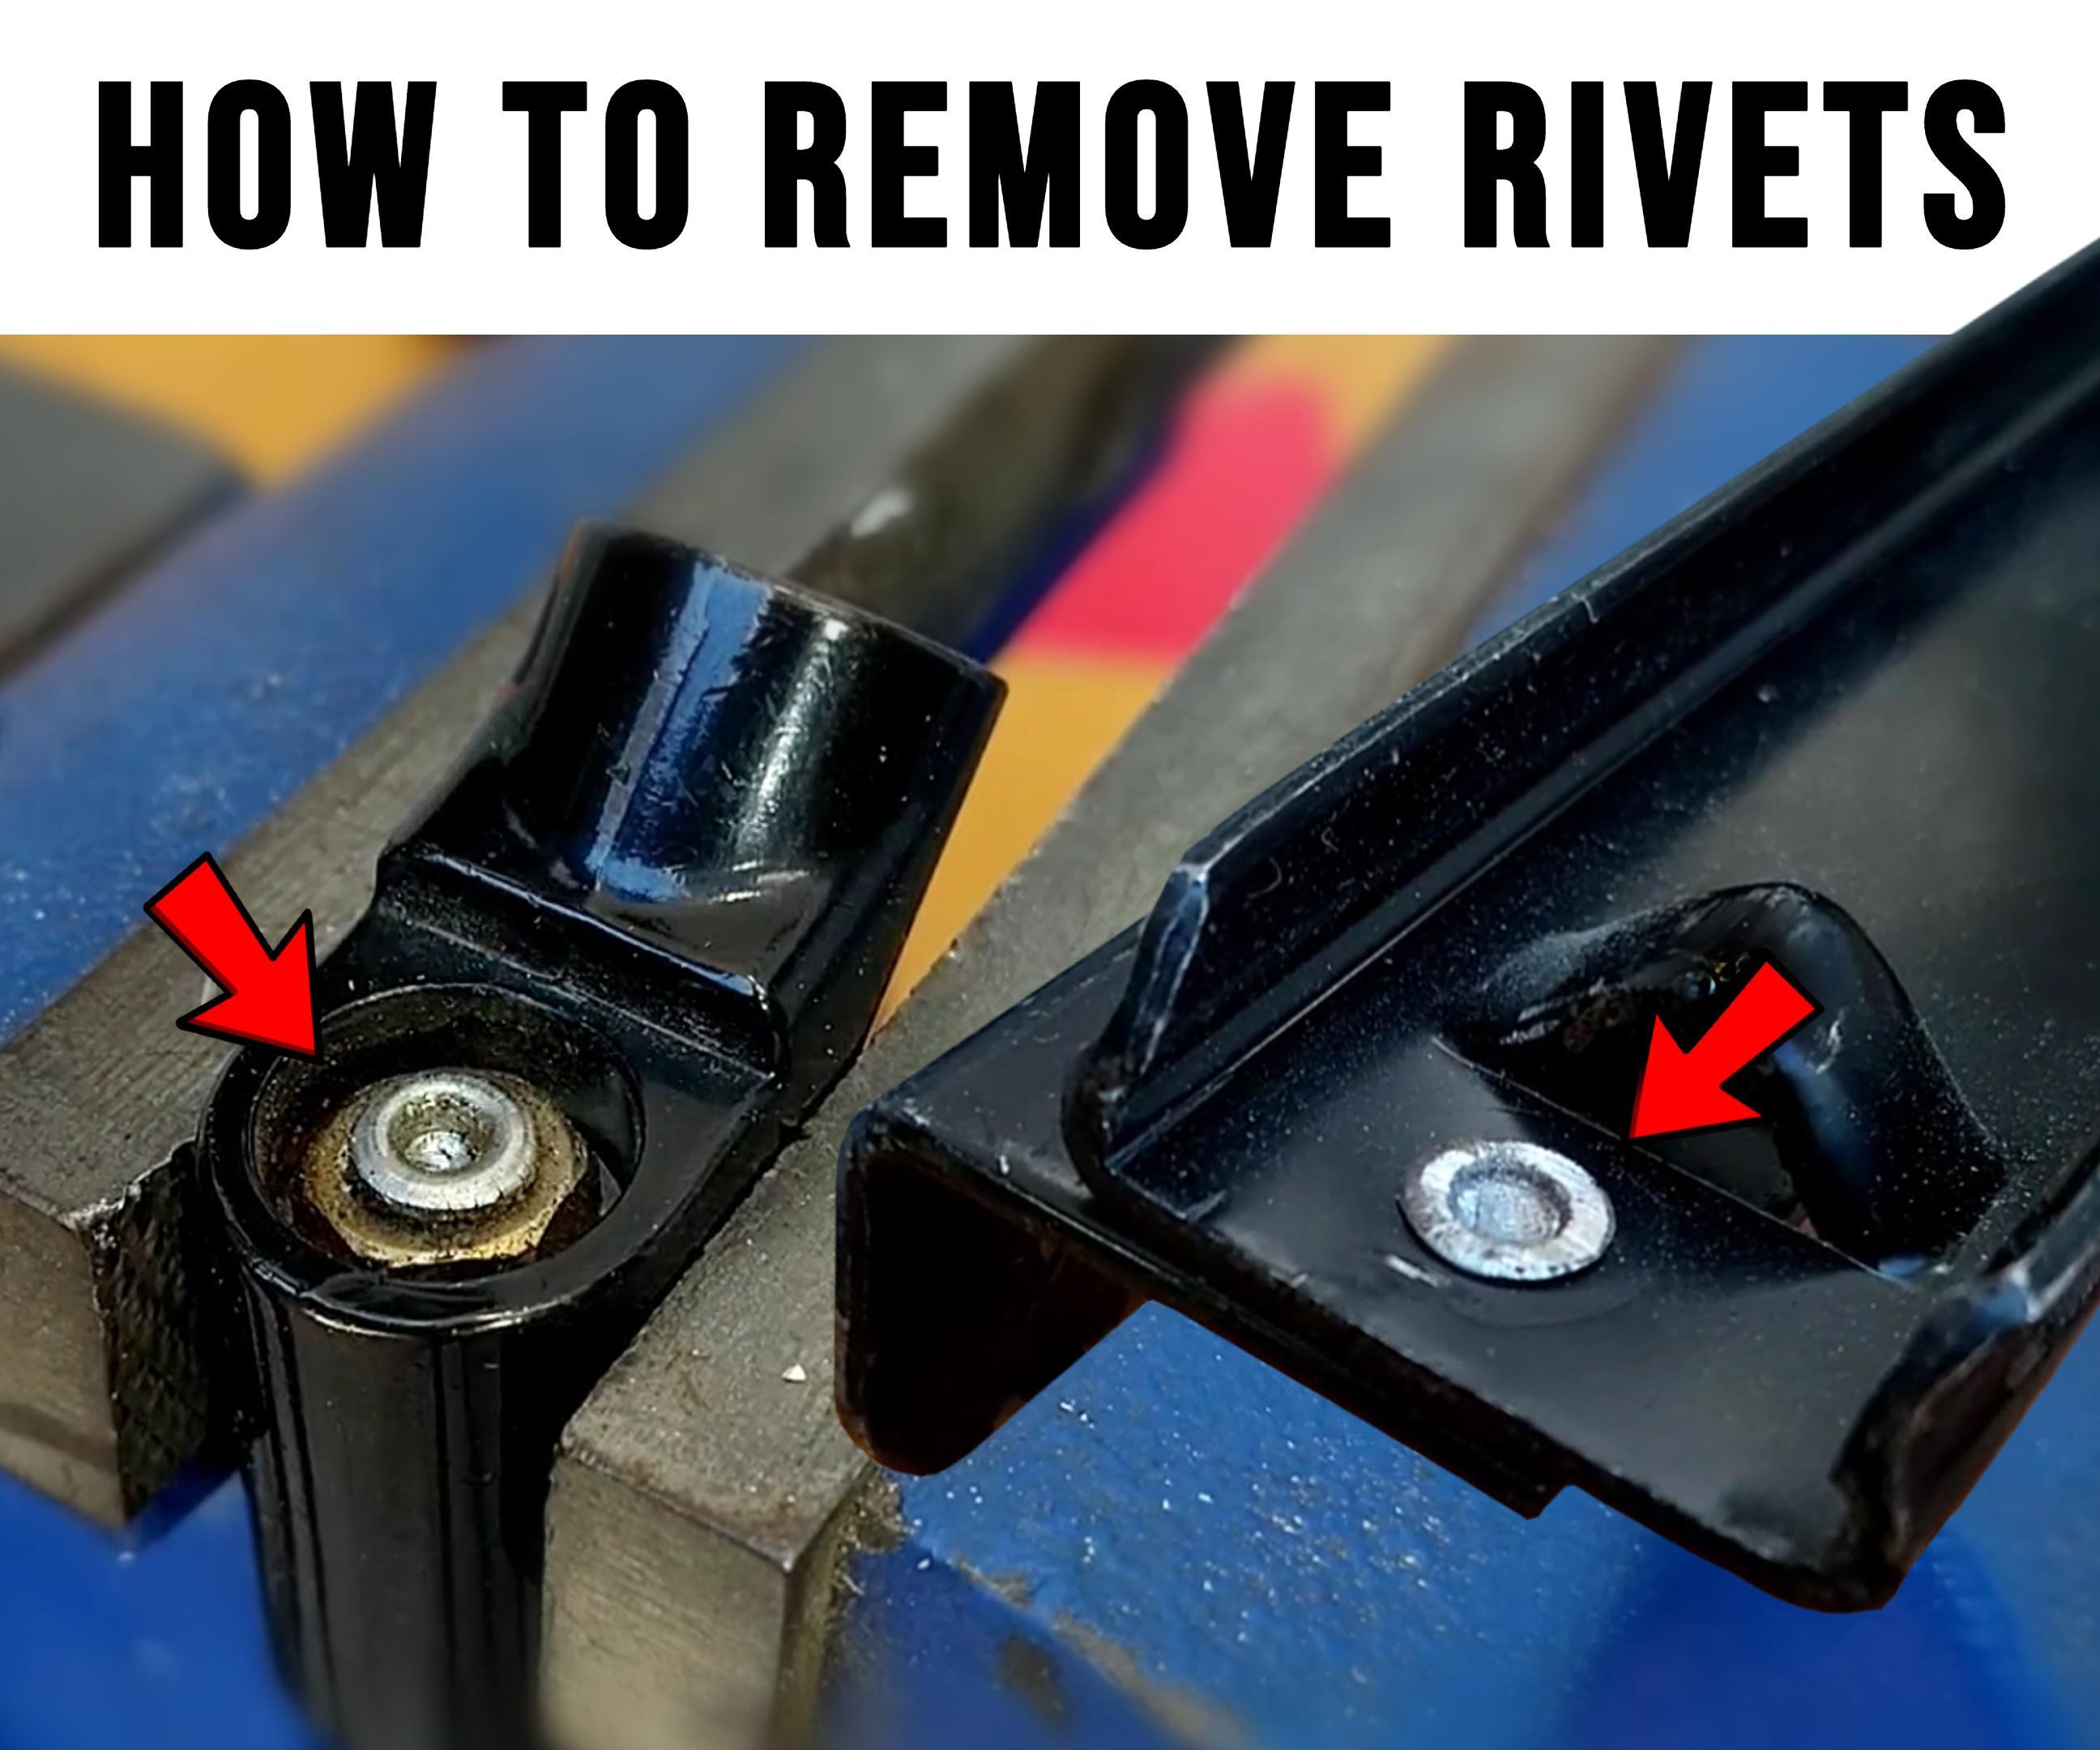 4 Best Ways to Remove Rivets Without a Rivet Tool